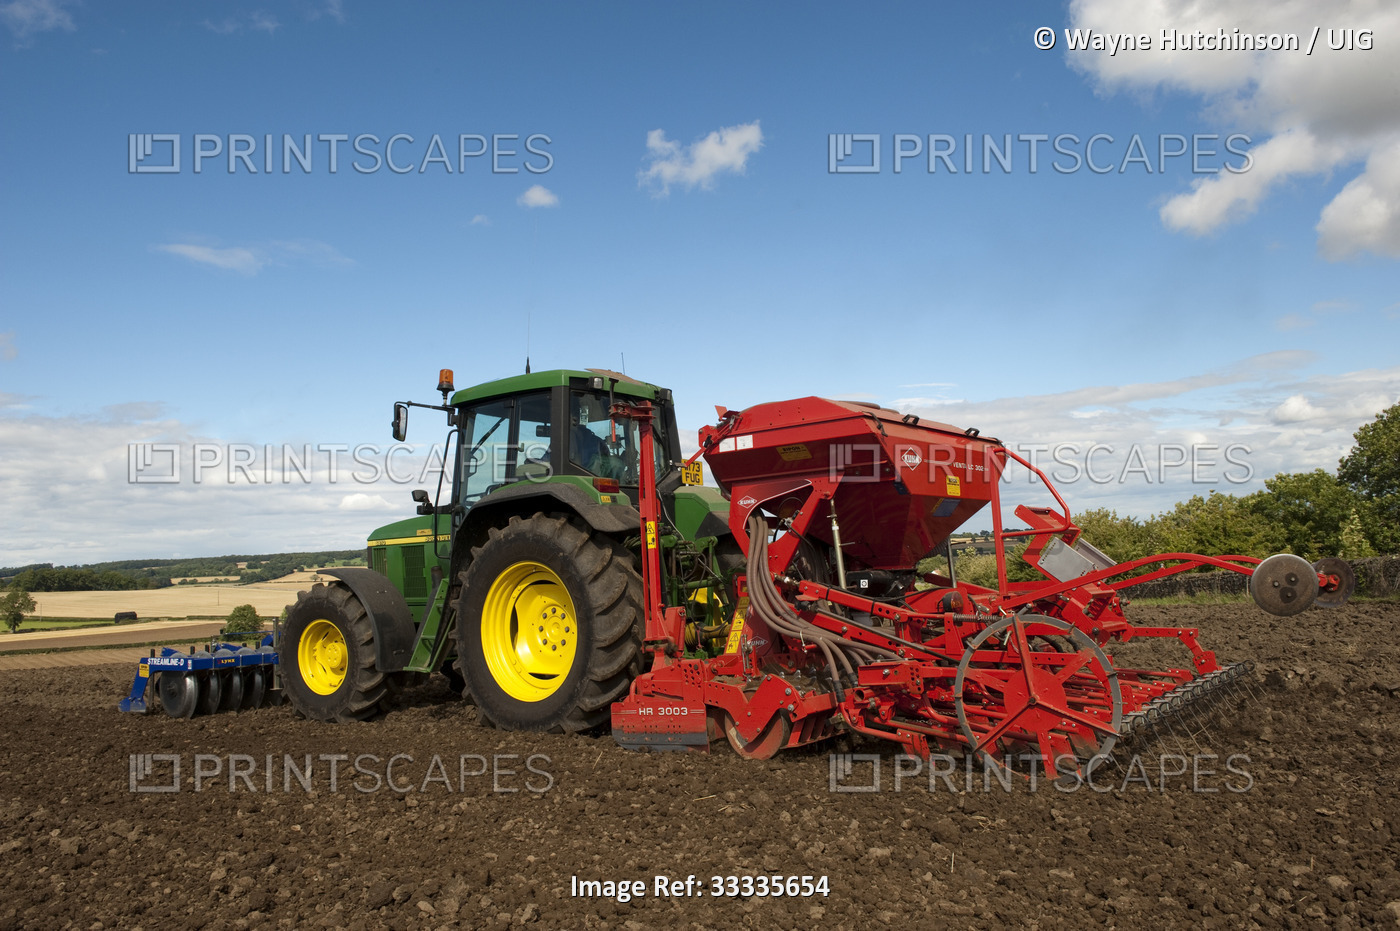 John Deere tractor with front press and rear seed drill planting Oilseed Rape